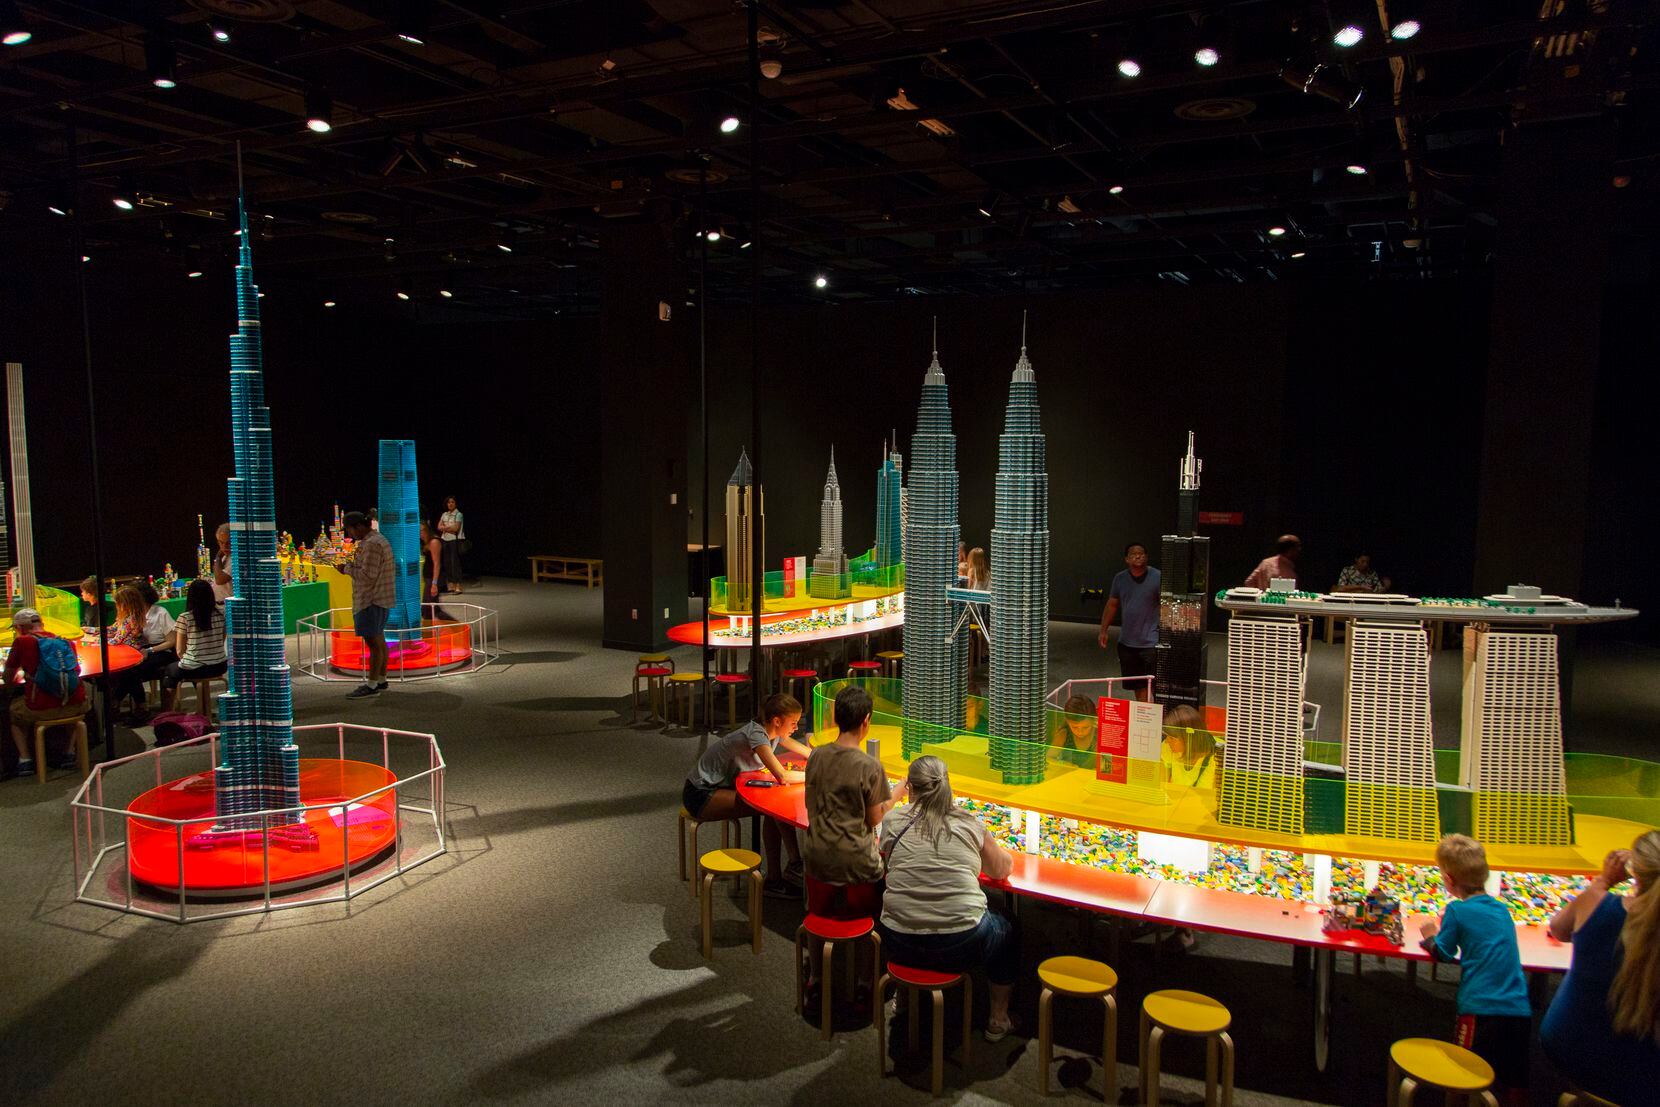 The Perot Museum of Nature and Science will host the touring exhibition "Towers of Tomorrow...